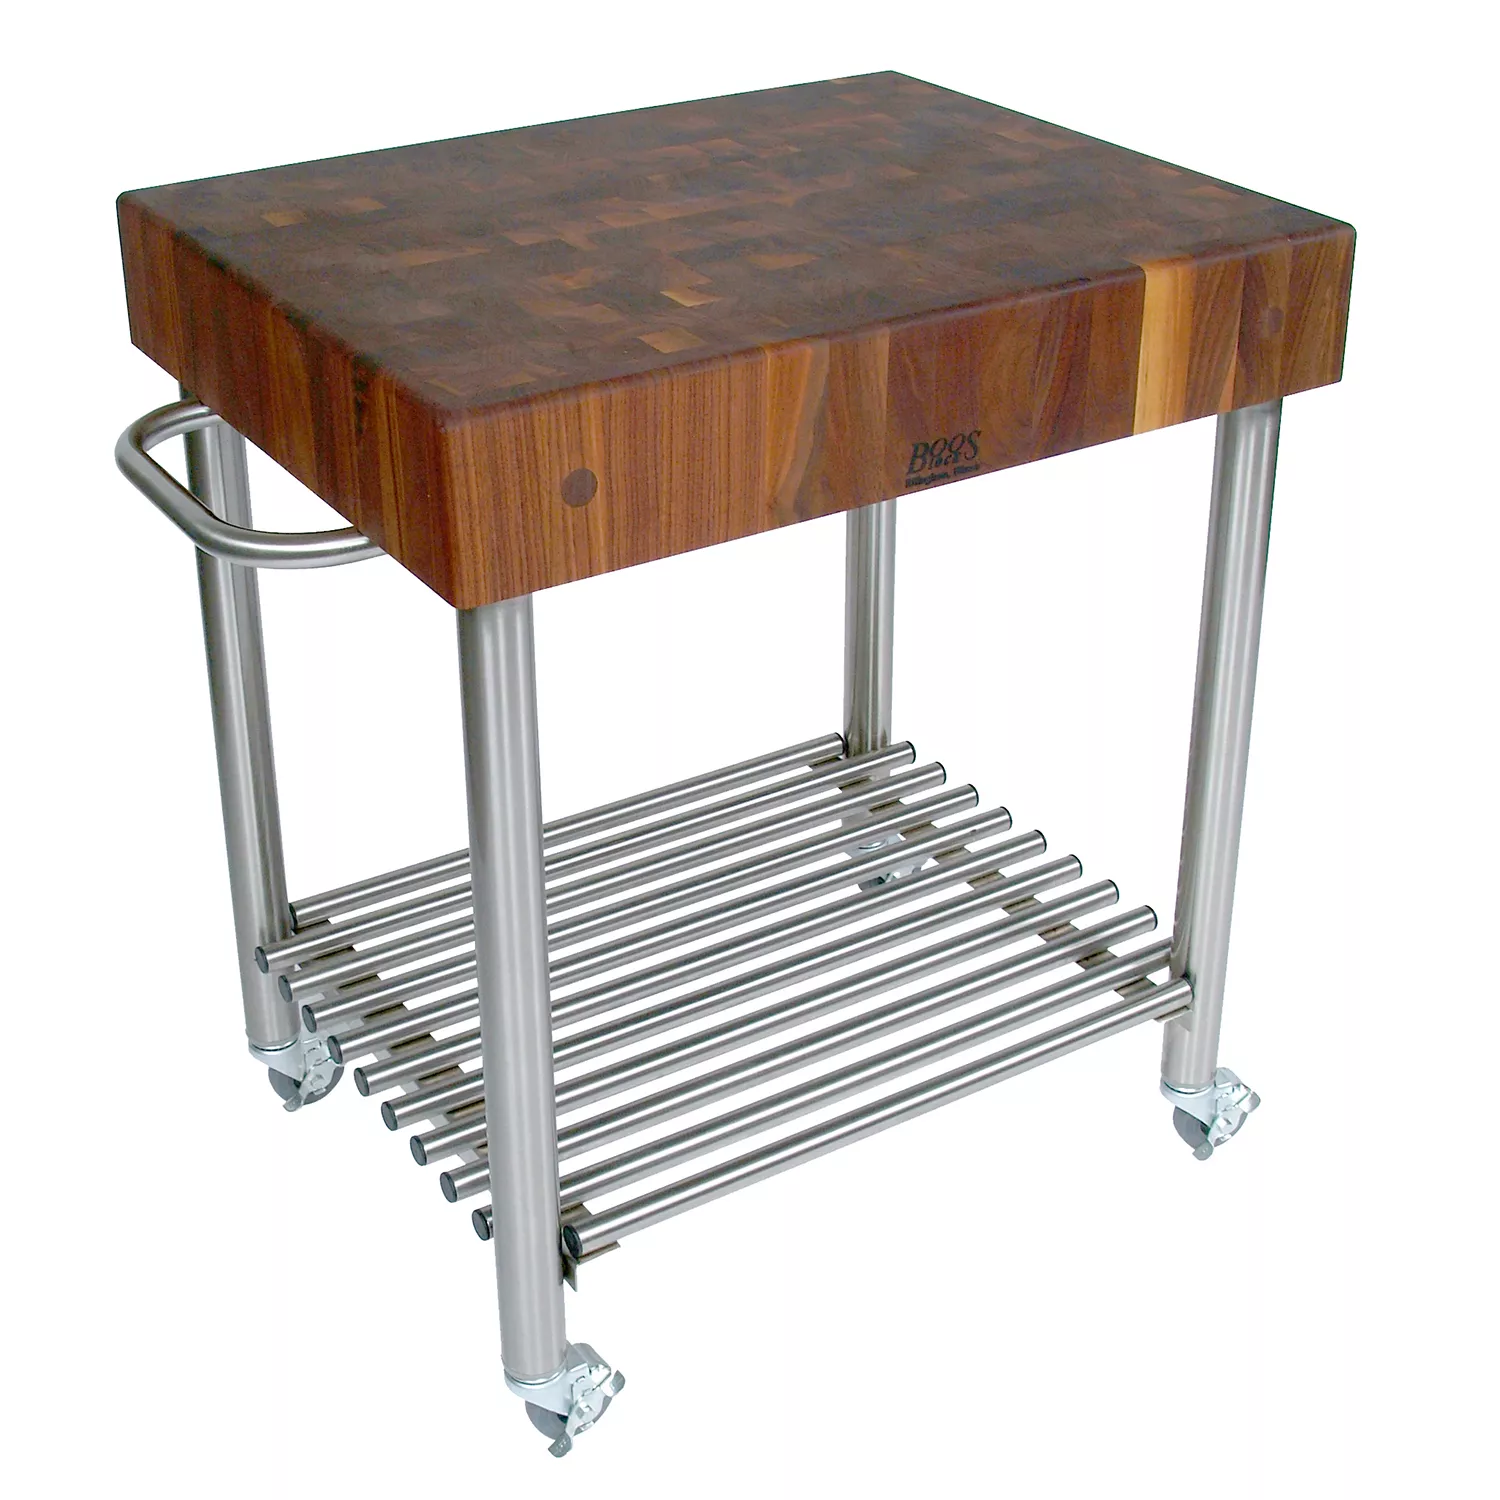 John Boos Maple End Grain 5" Thick Butcher Block Table Cart with Casters, 30"x24"x35"